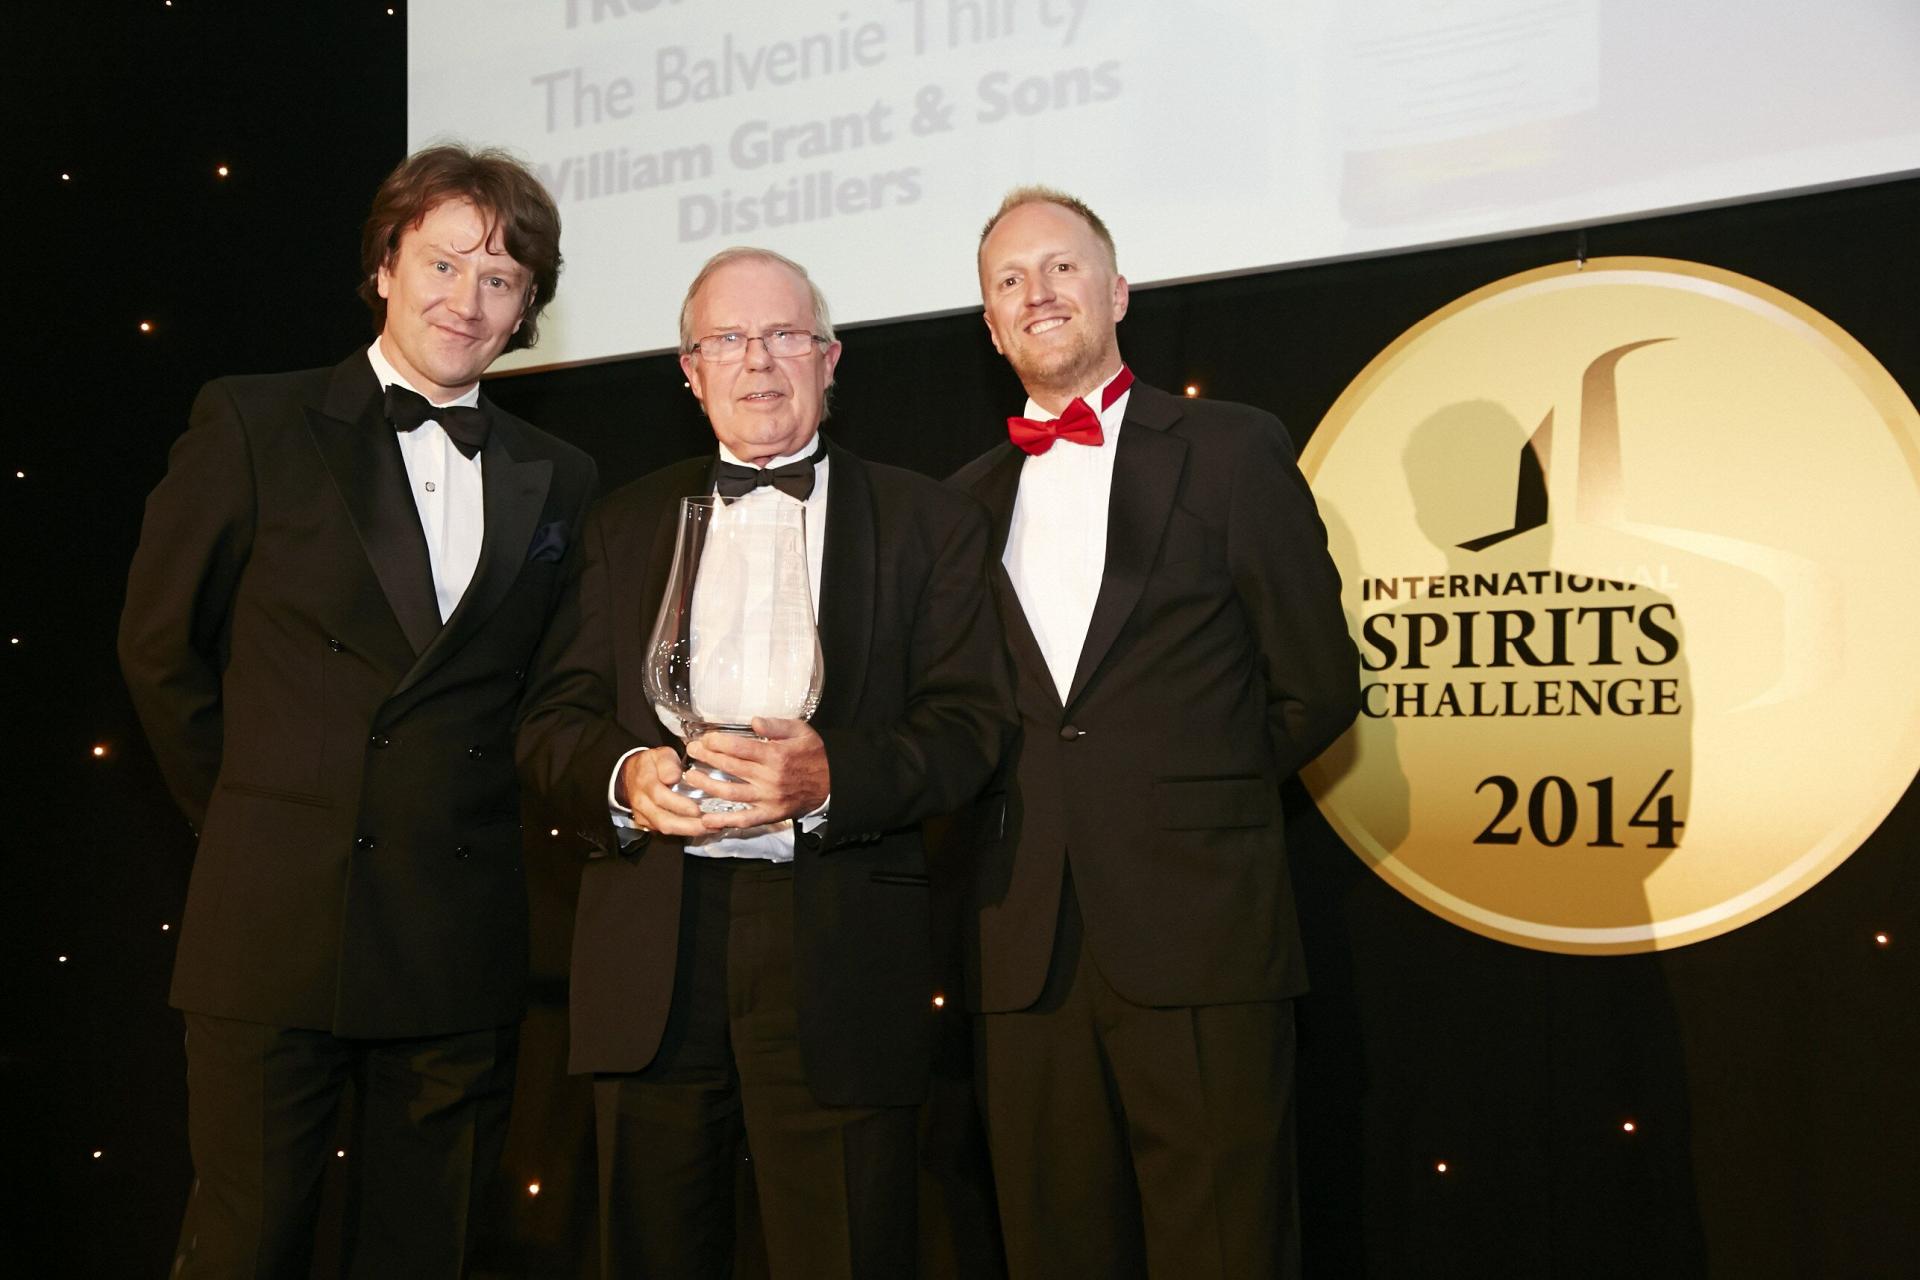 David Stewart accepting the Gold Medal award for The Balvenie 30 at the International Spirits Challenge 2014